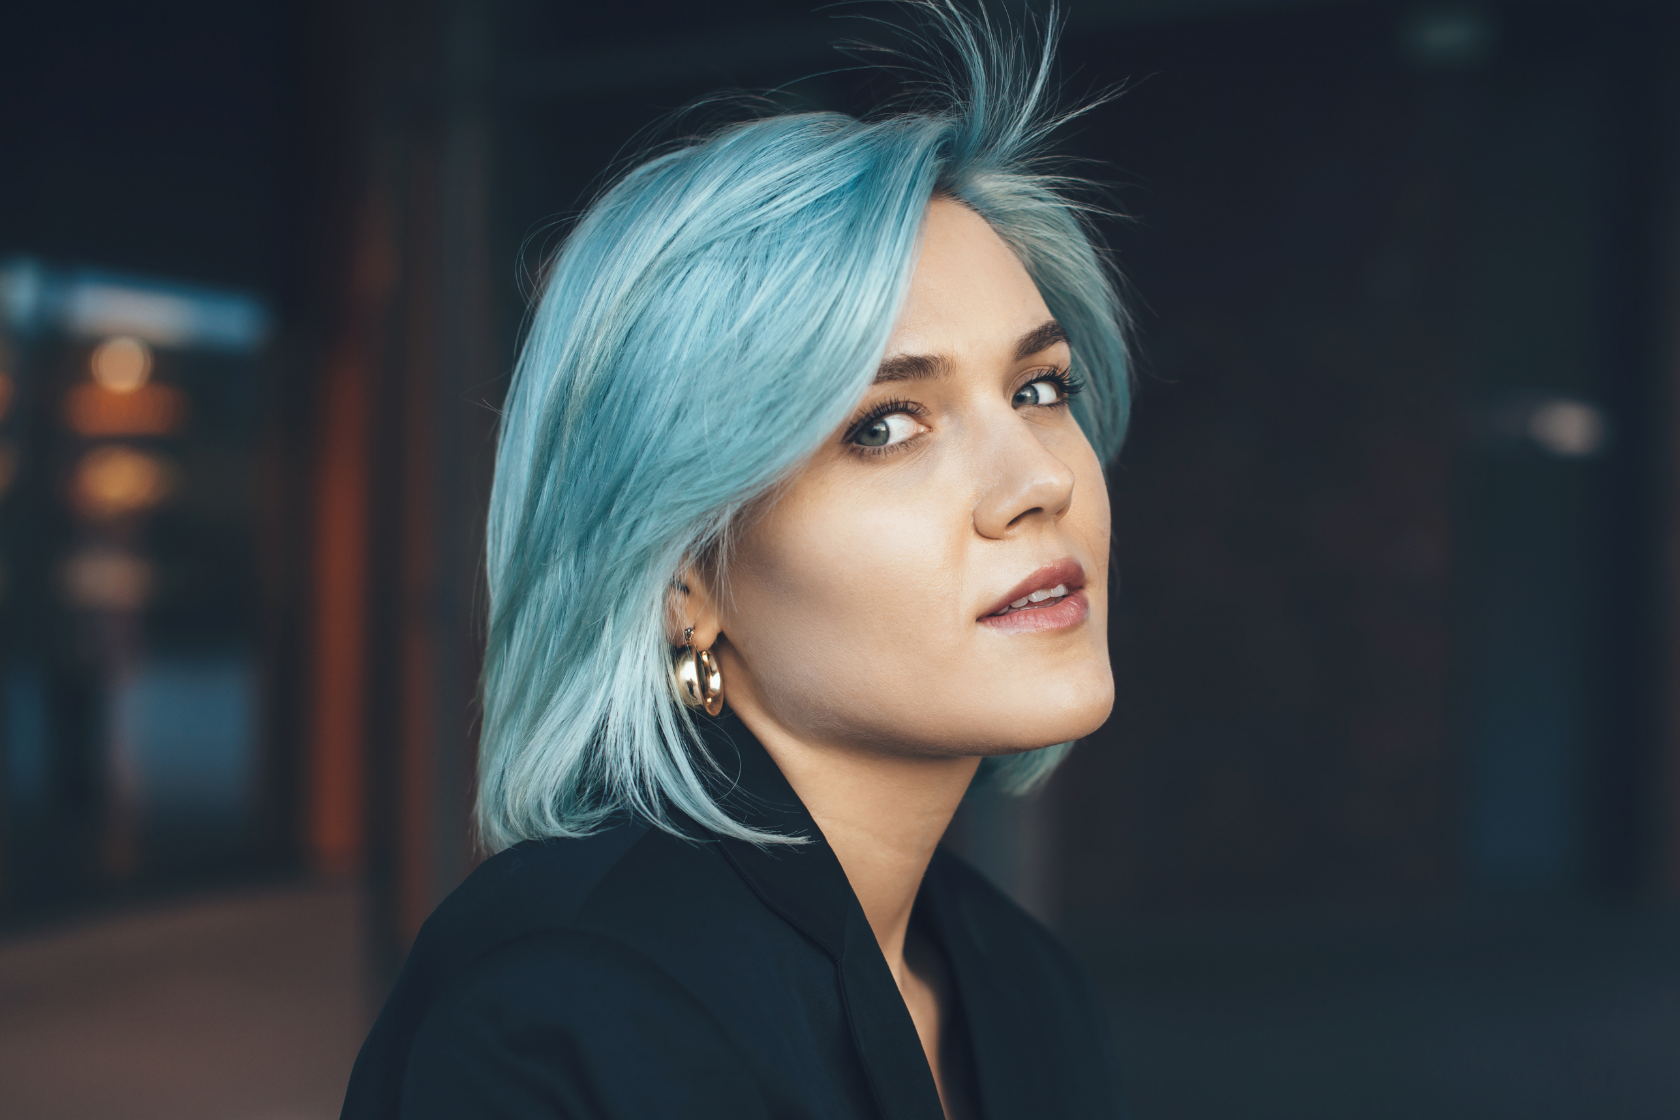 Blue Hair: A Trend That Needs to Die - wide 4